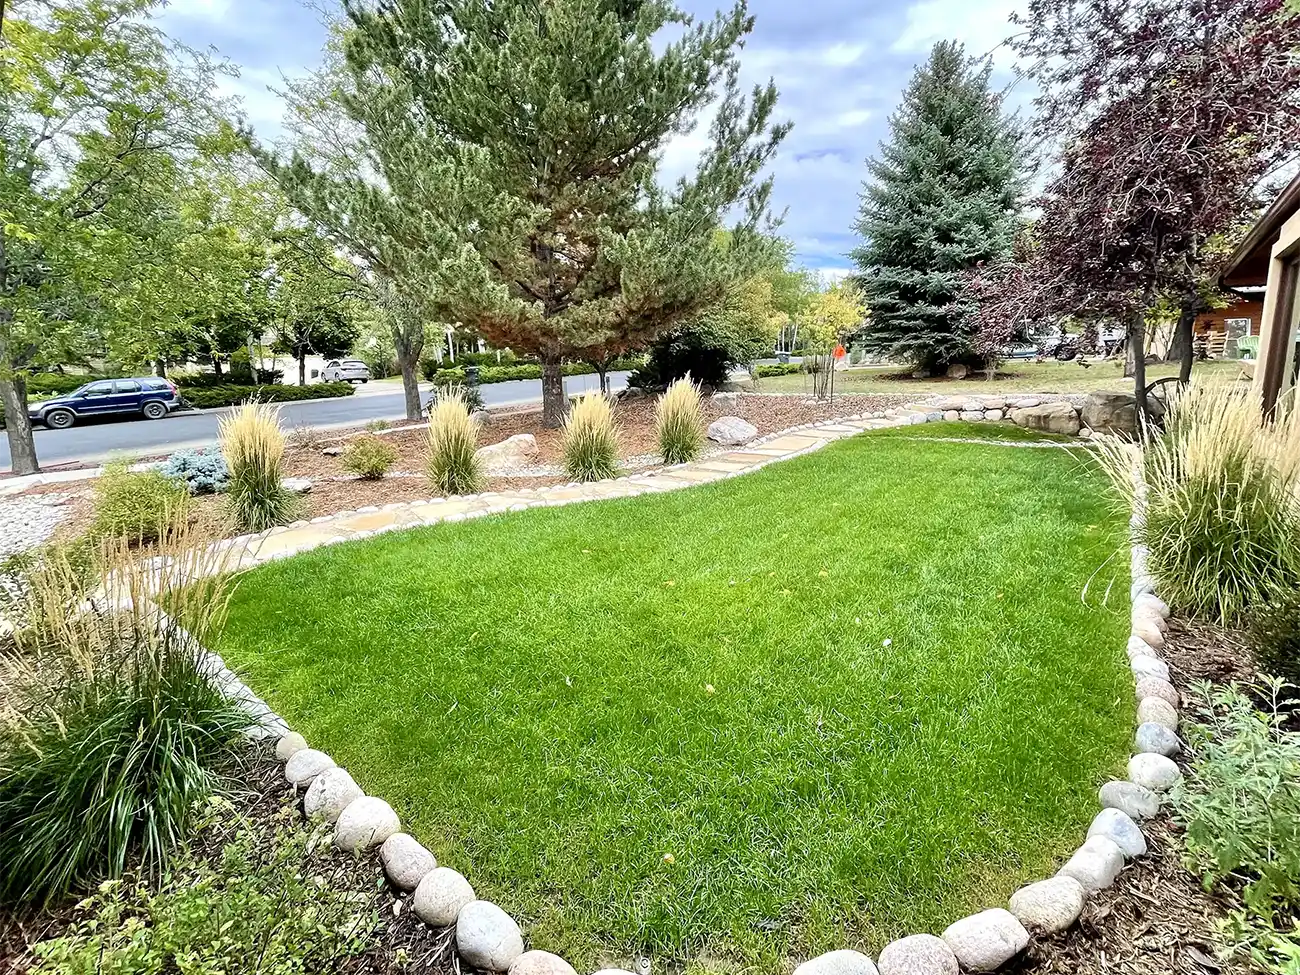 About True Blue Landscaping